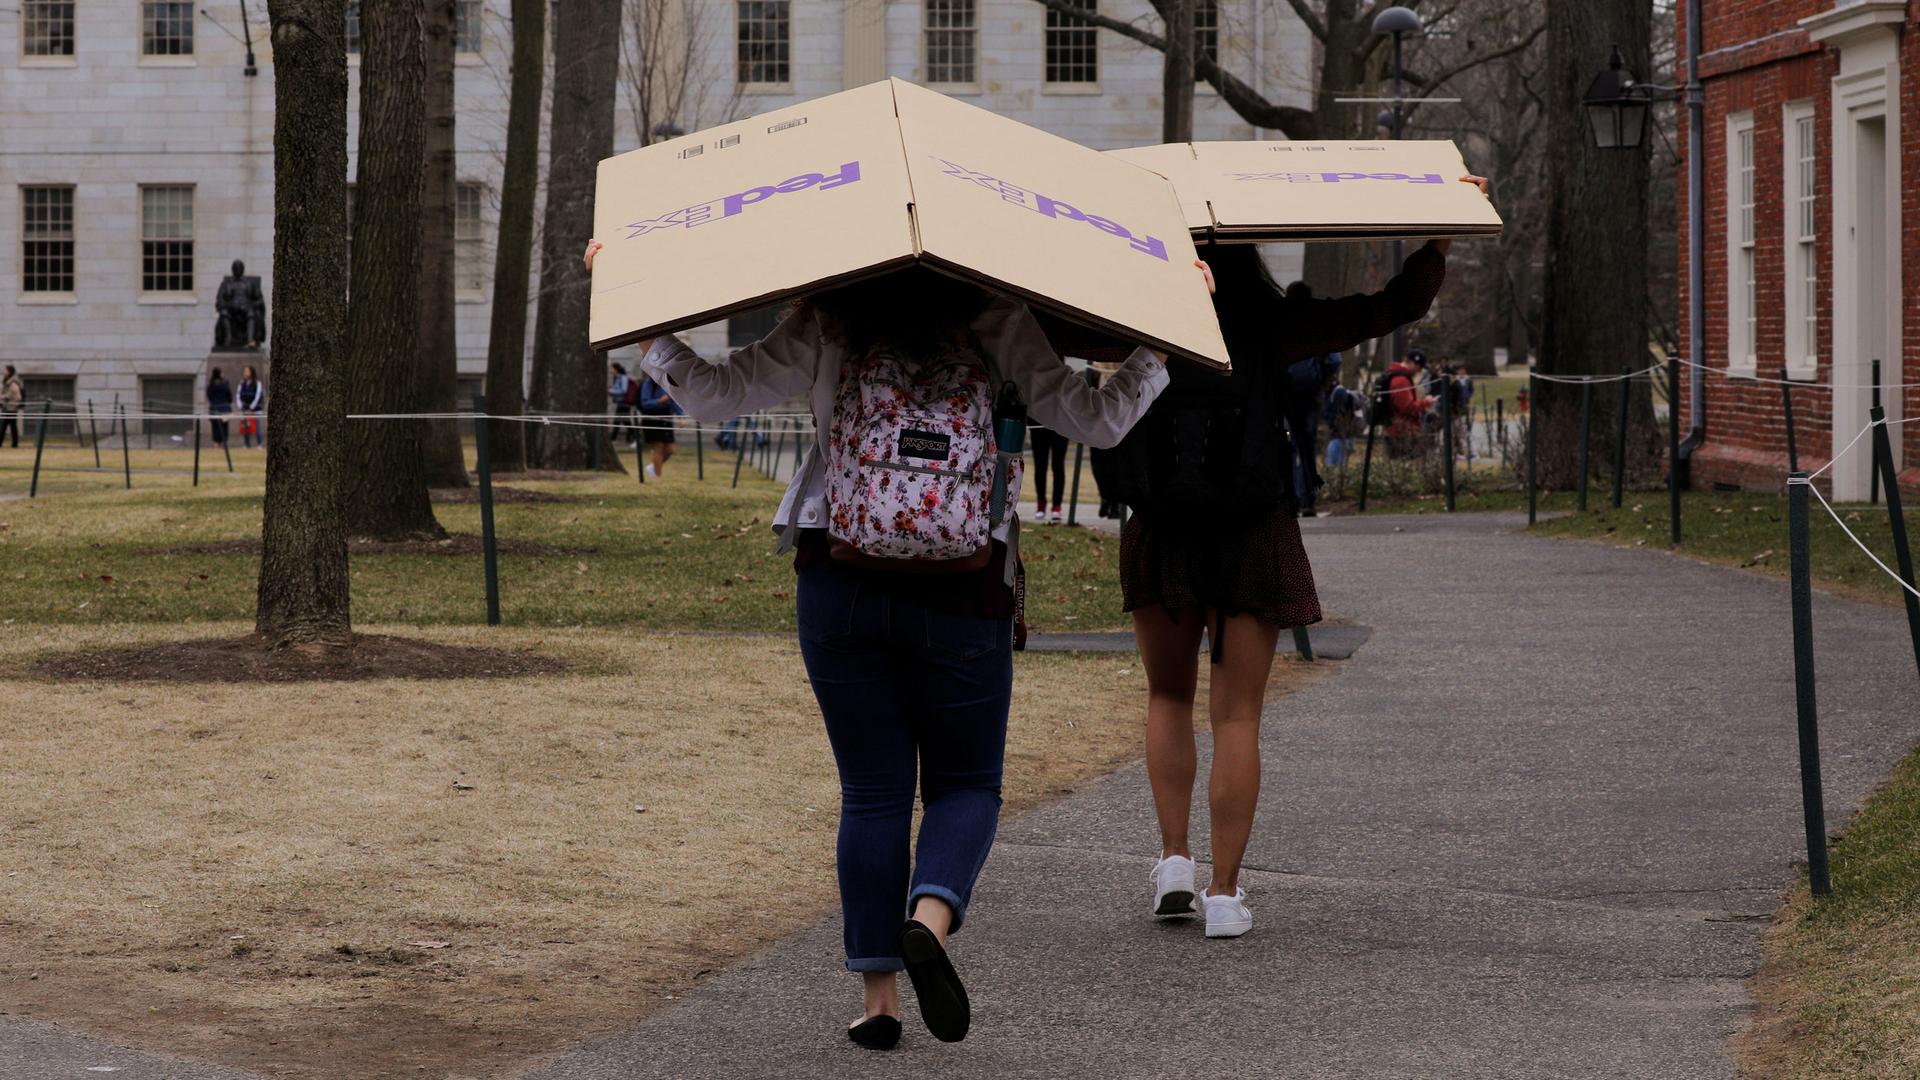 Two women are shown carrying cardboard FedEx boxes over their heads as they walk through Harvard University's campus.